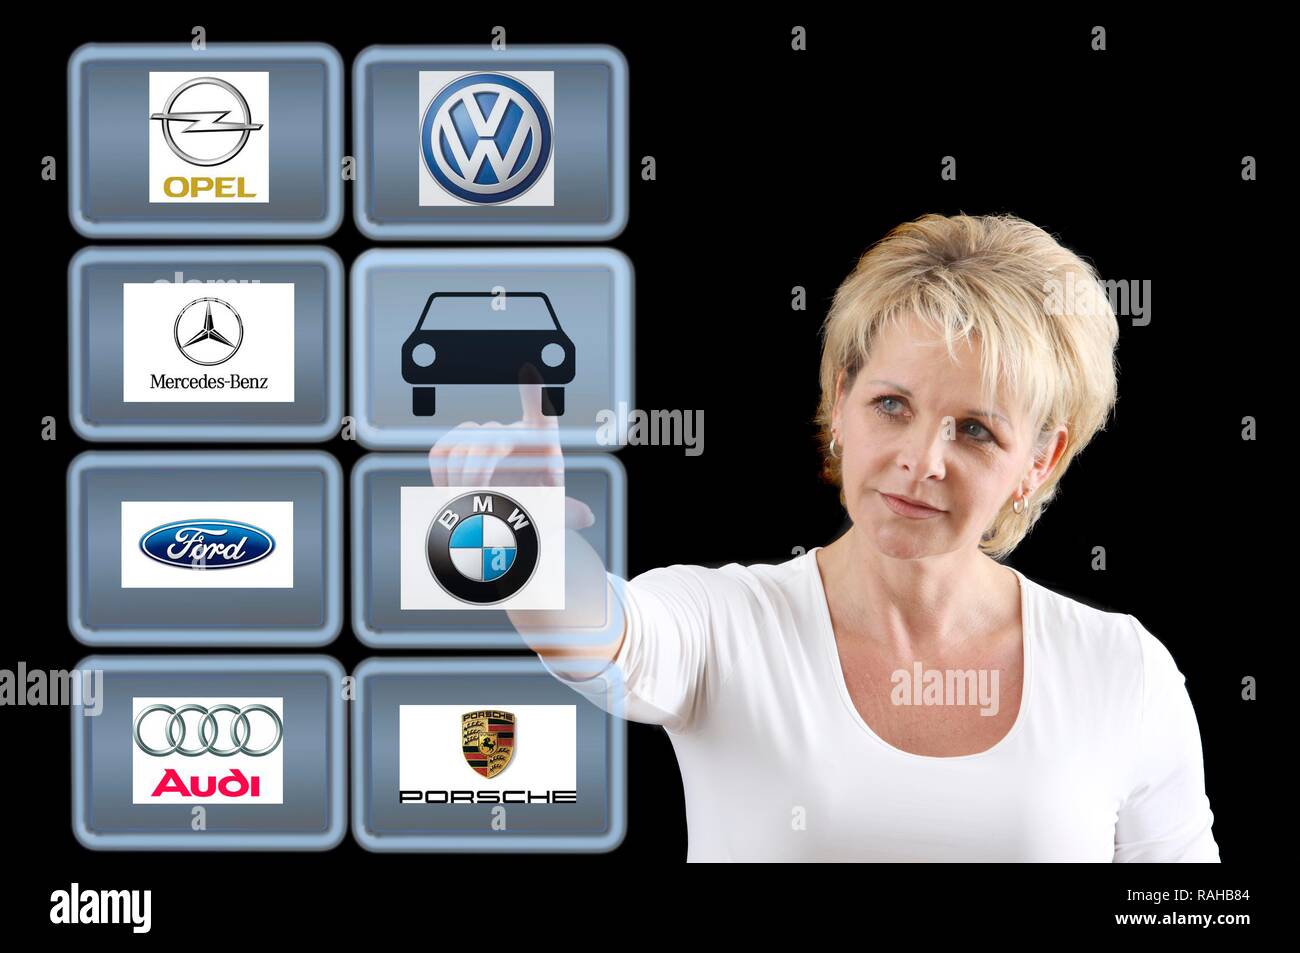 Woman working with a virtual screen, touch screen, German car brands Stock Photo